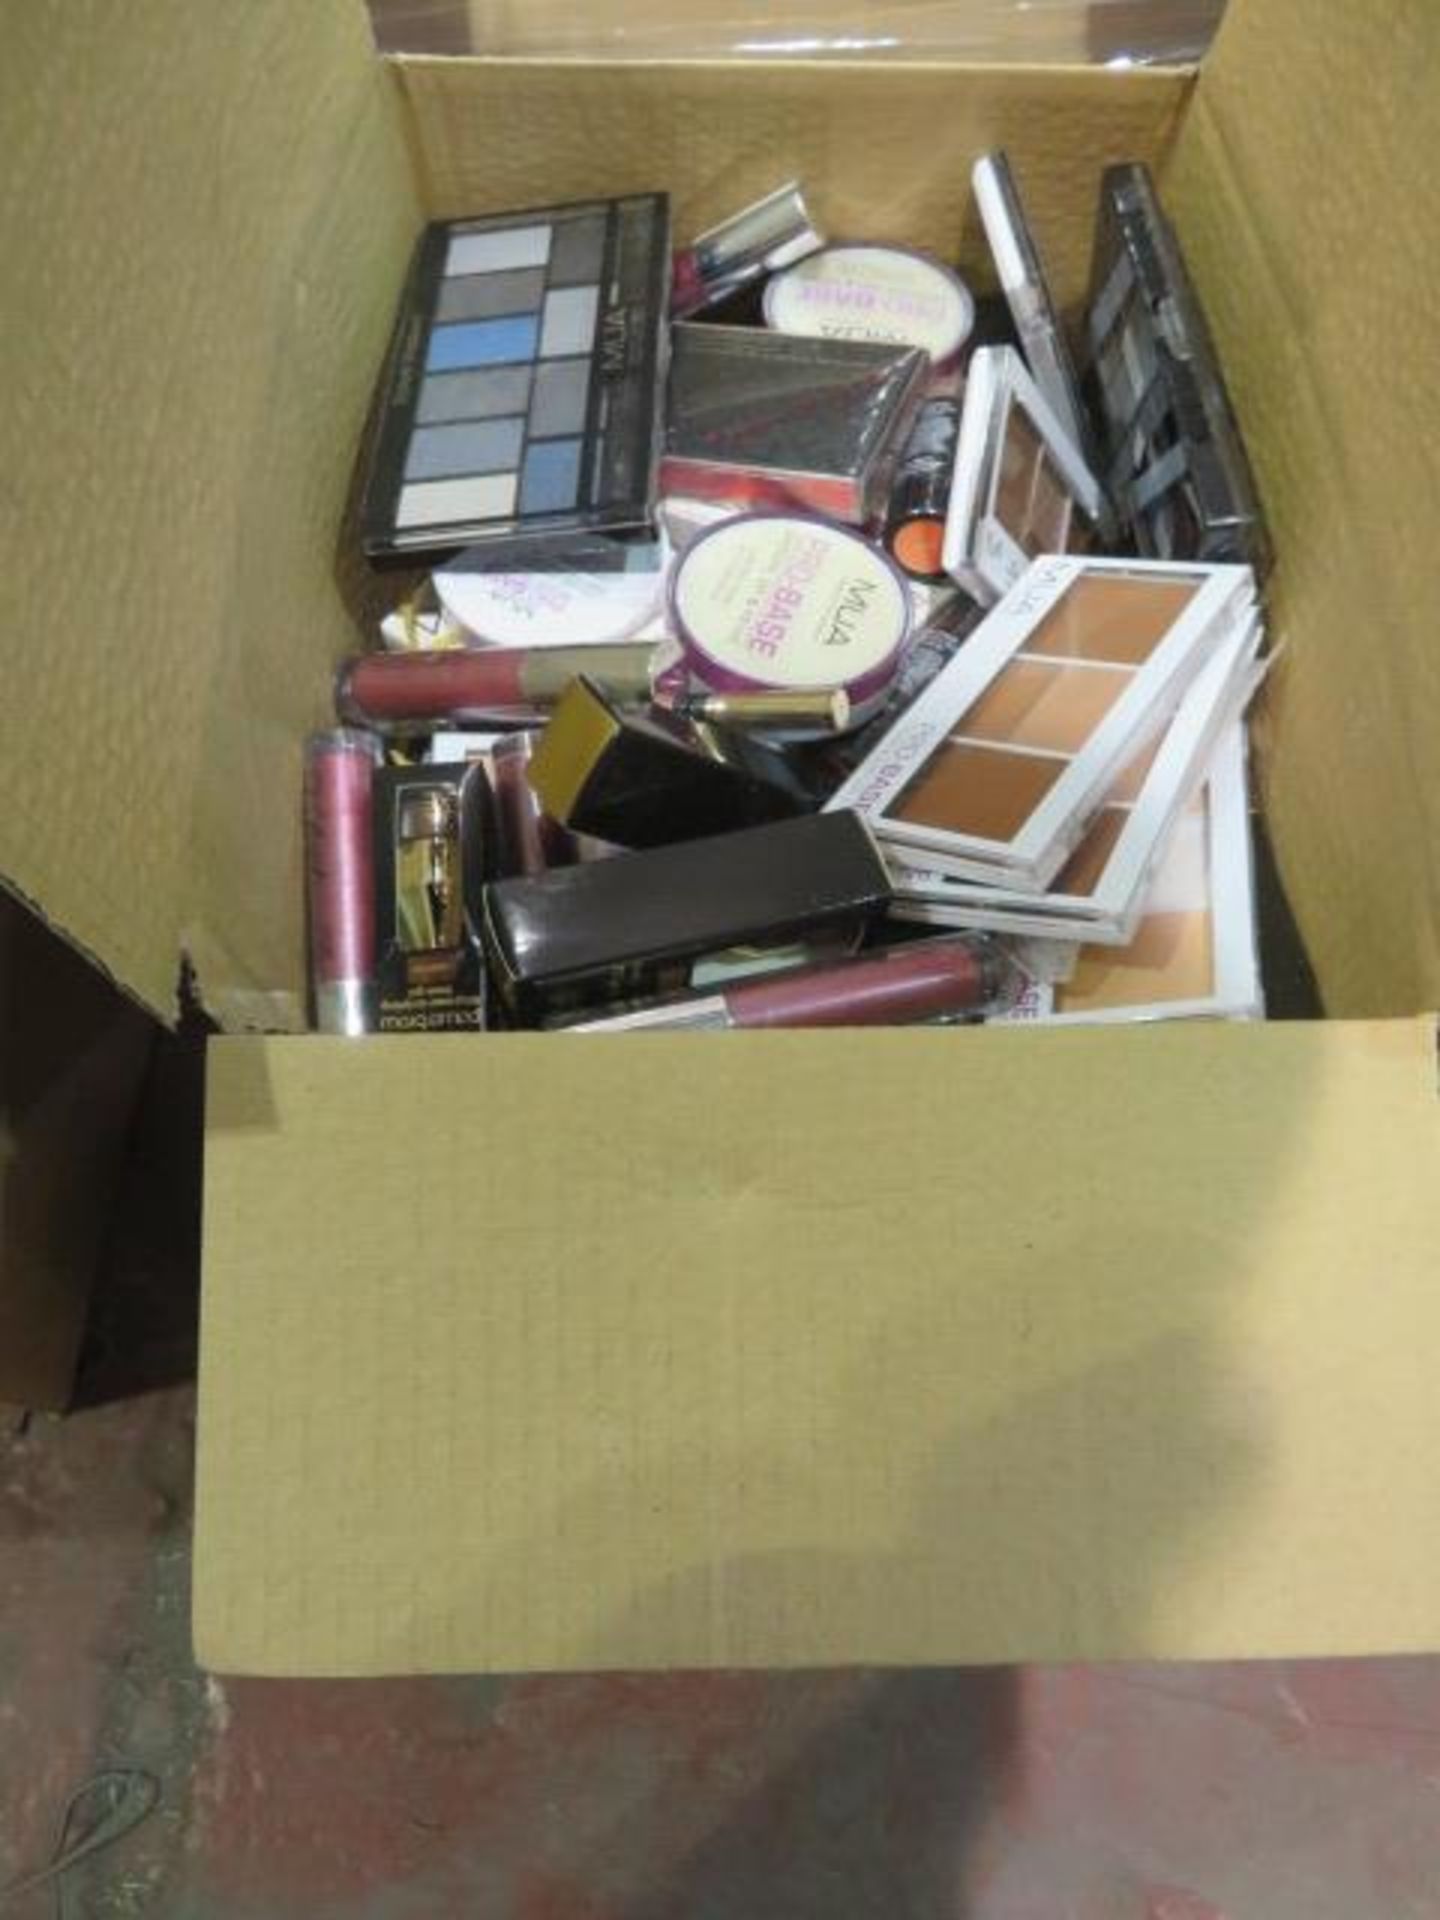 Circa. 200 items of various new make up acadamy make up to include: probase smooth, set & prime, - Image 2 of 2